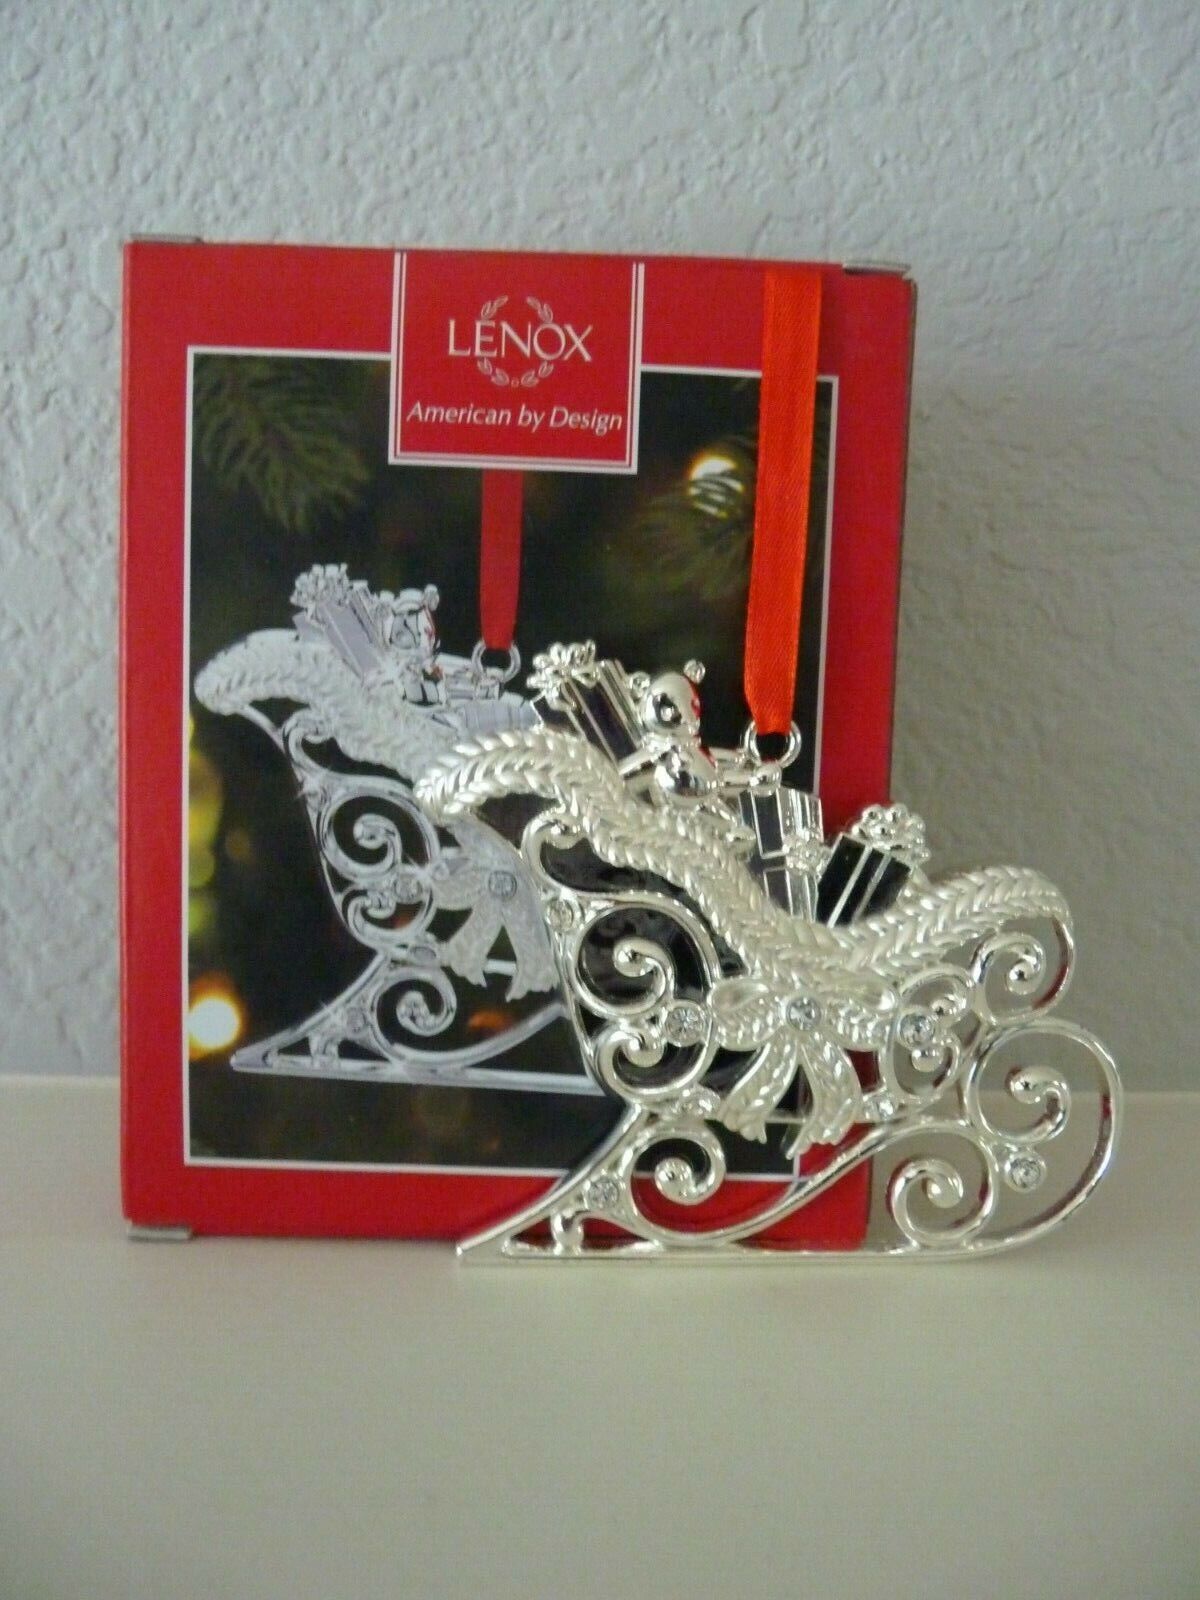 LENOX Sparkle and Scroll Sleigh Ornament Clear Frosted Silverplated #875845 EUC